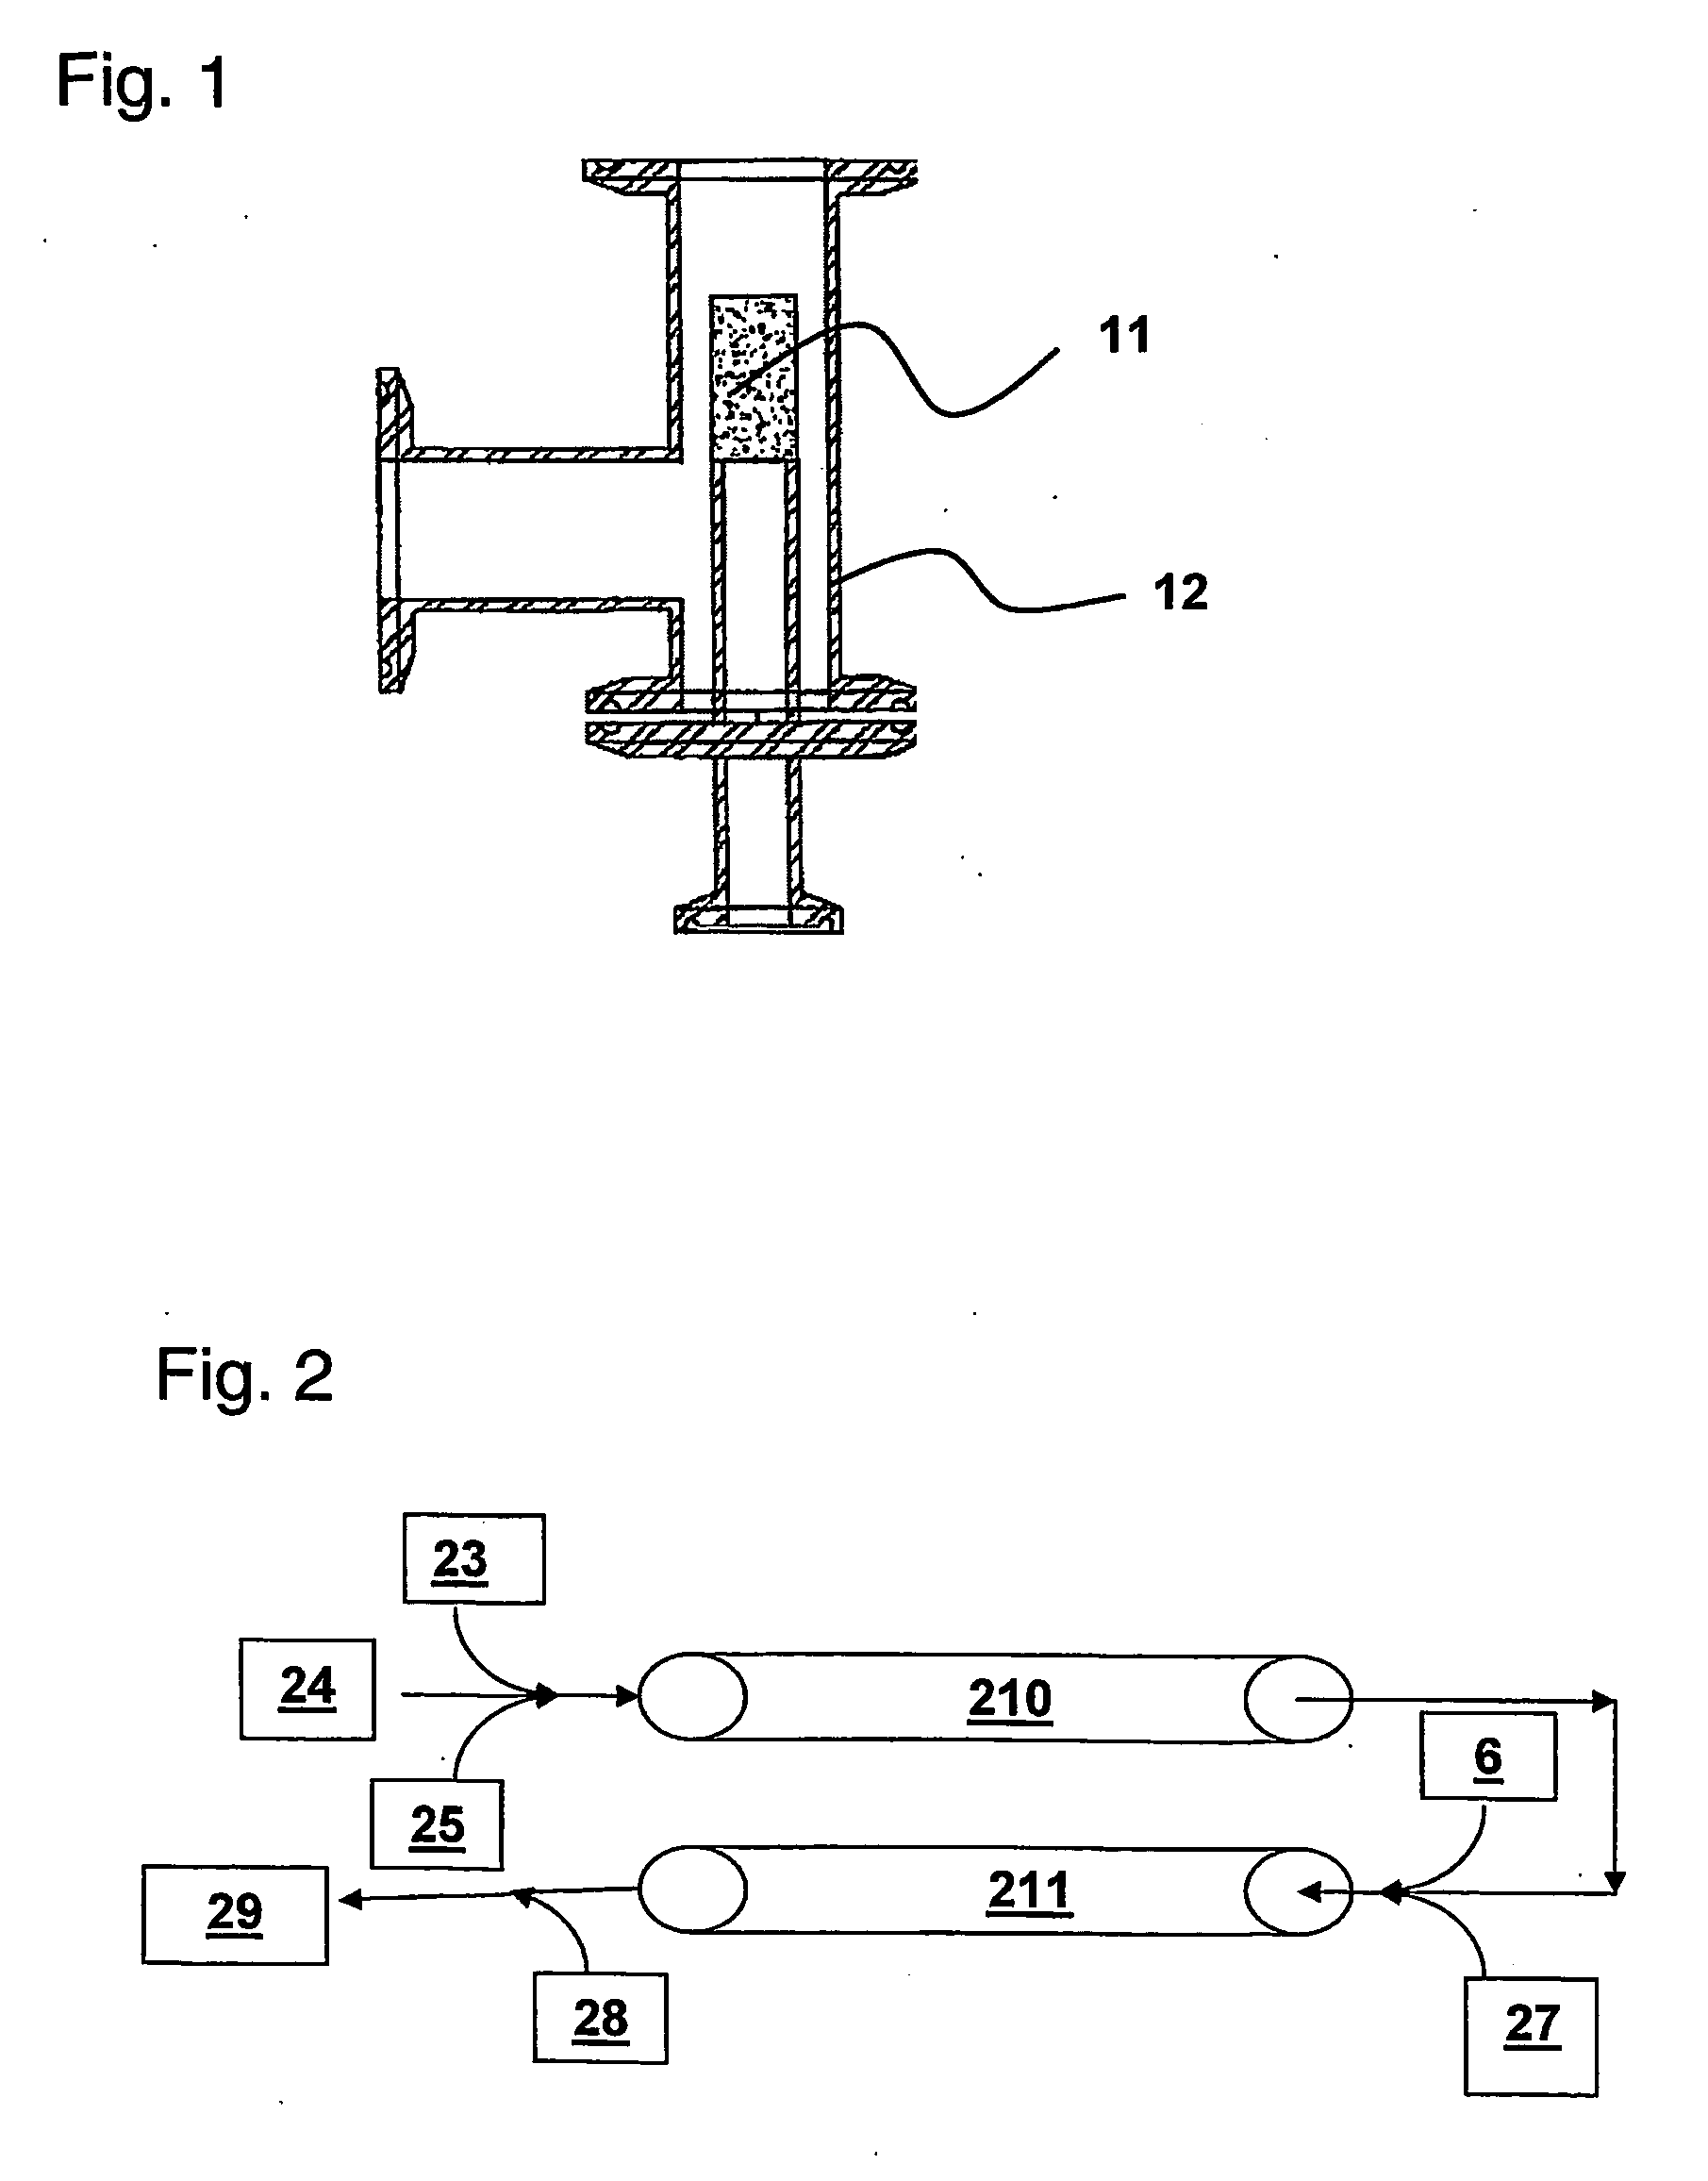 Apparatus and method for preparative scale purification of nucleic acids